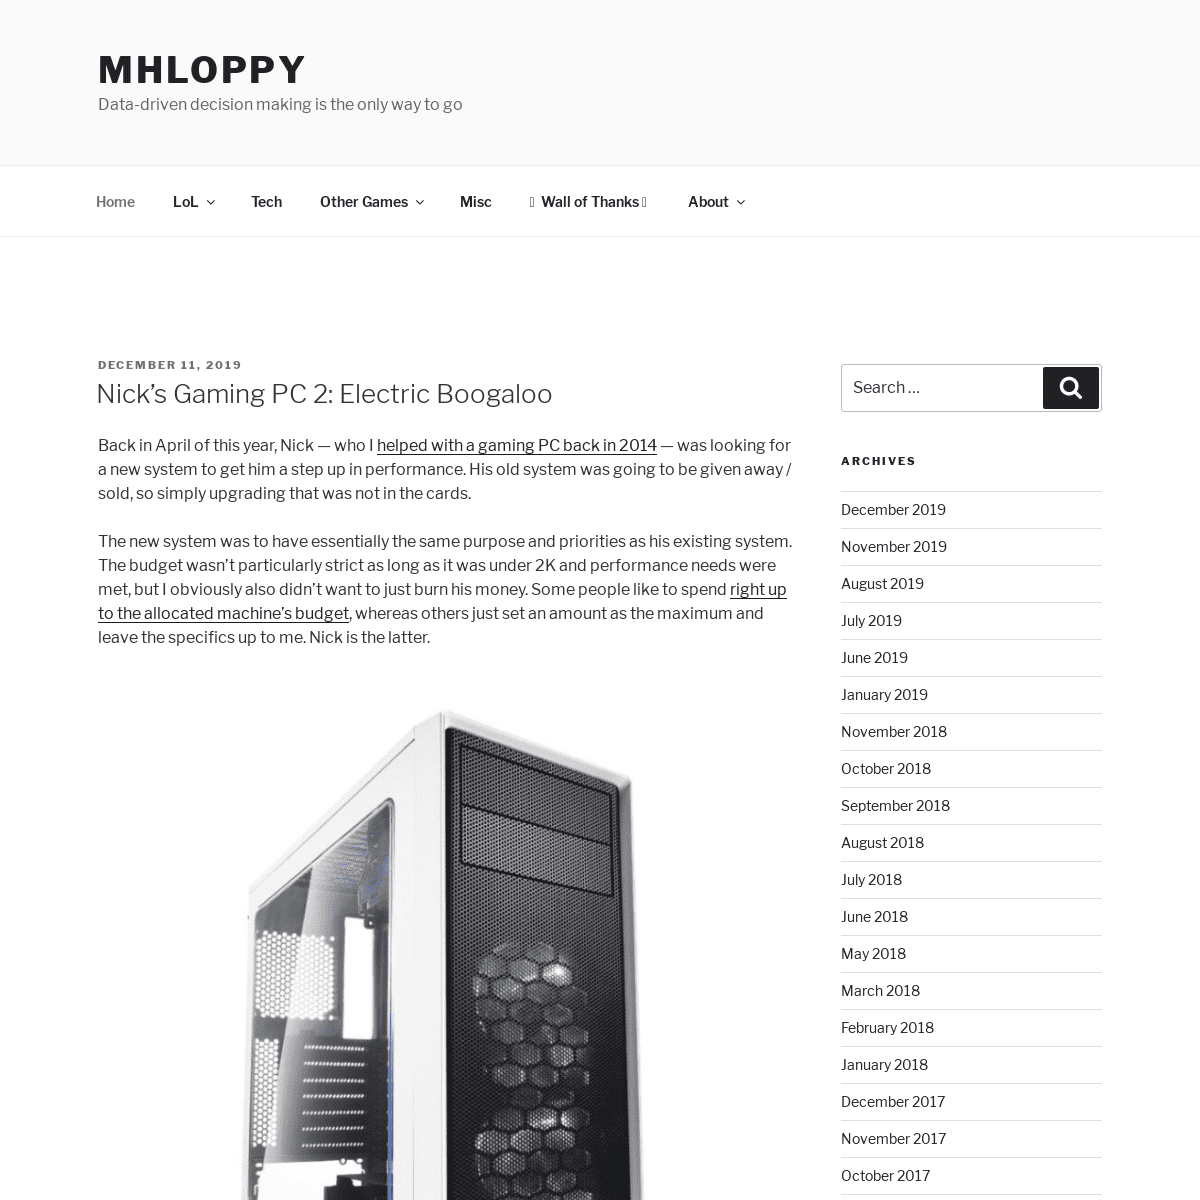 A complete backup of mhloppy.com